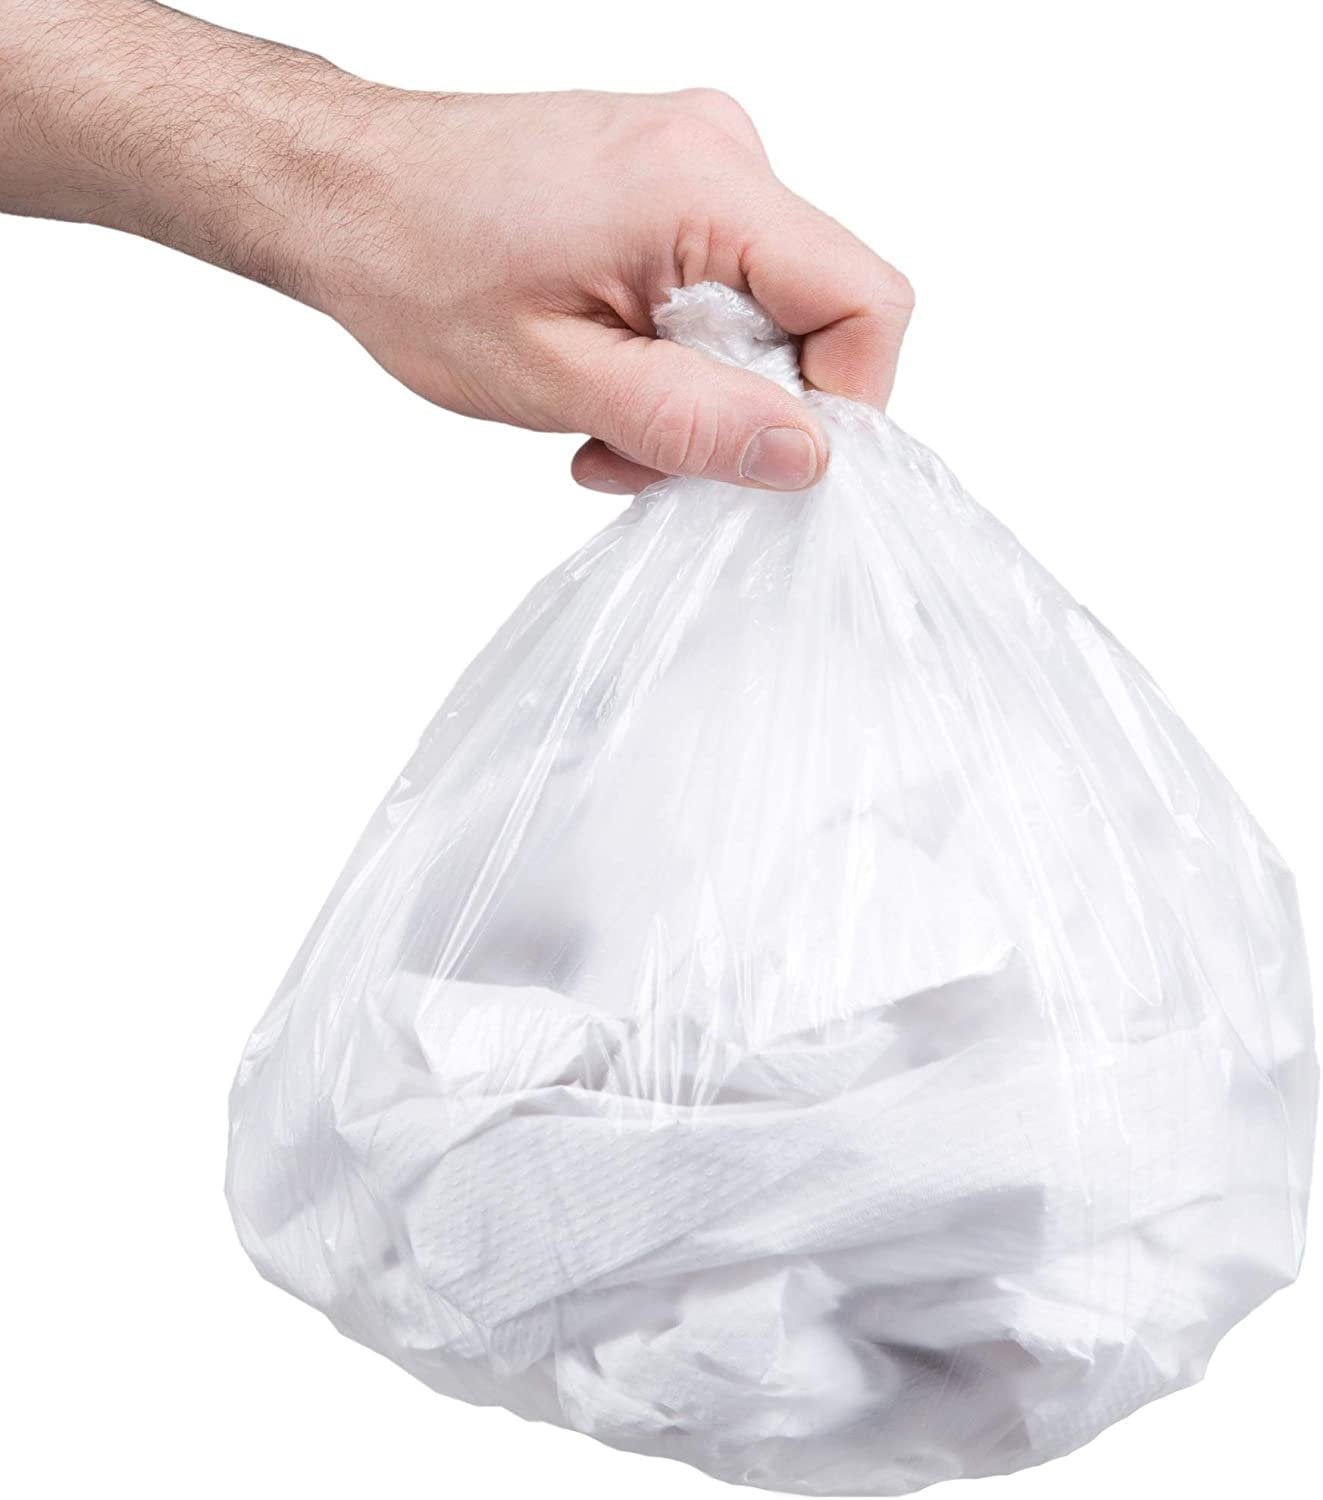 Plasticplace 6 Gallon Trash Bags 0.7 Mil White Drawstring Garbage Can Liners 17 inch x 20 inch (100 Count)